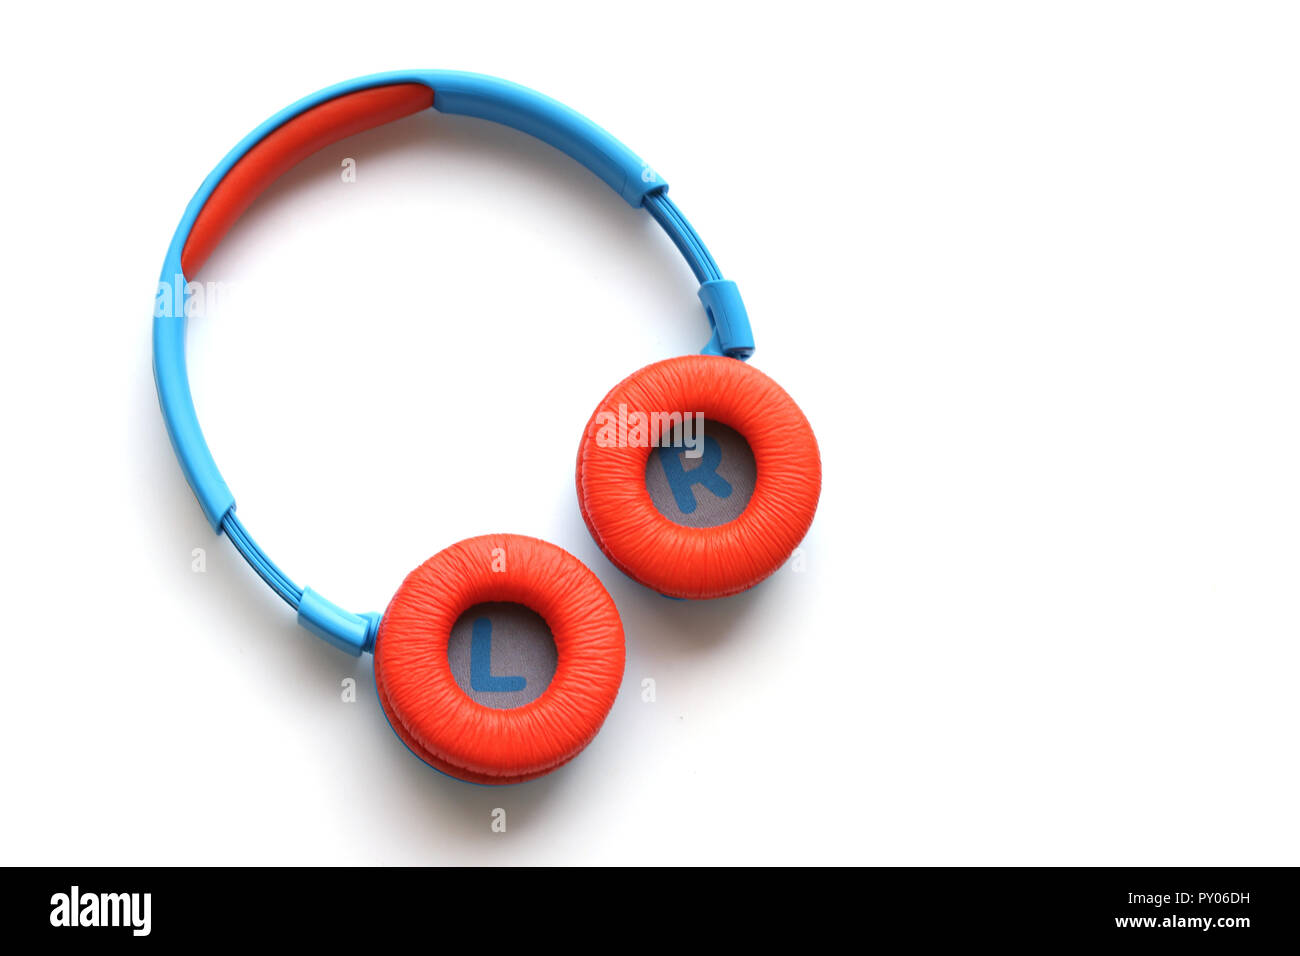 A child's wireless headphone isolated on a white background Stock Photo